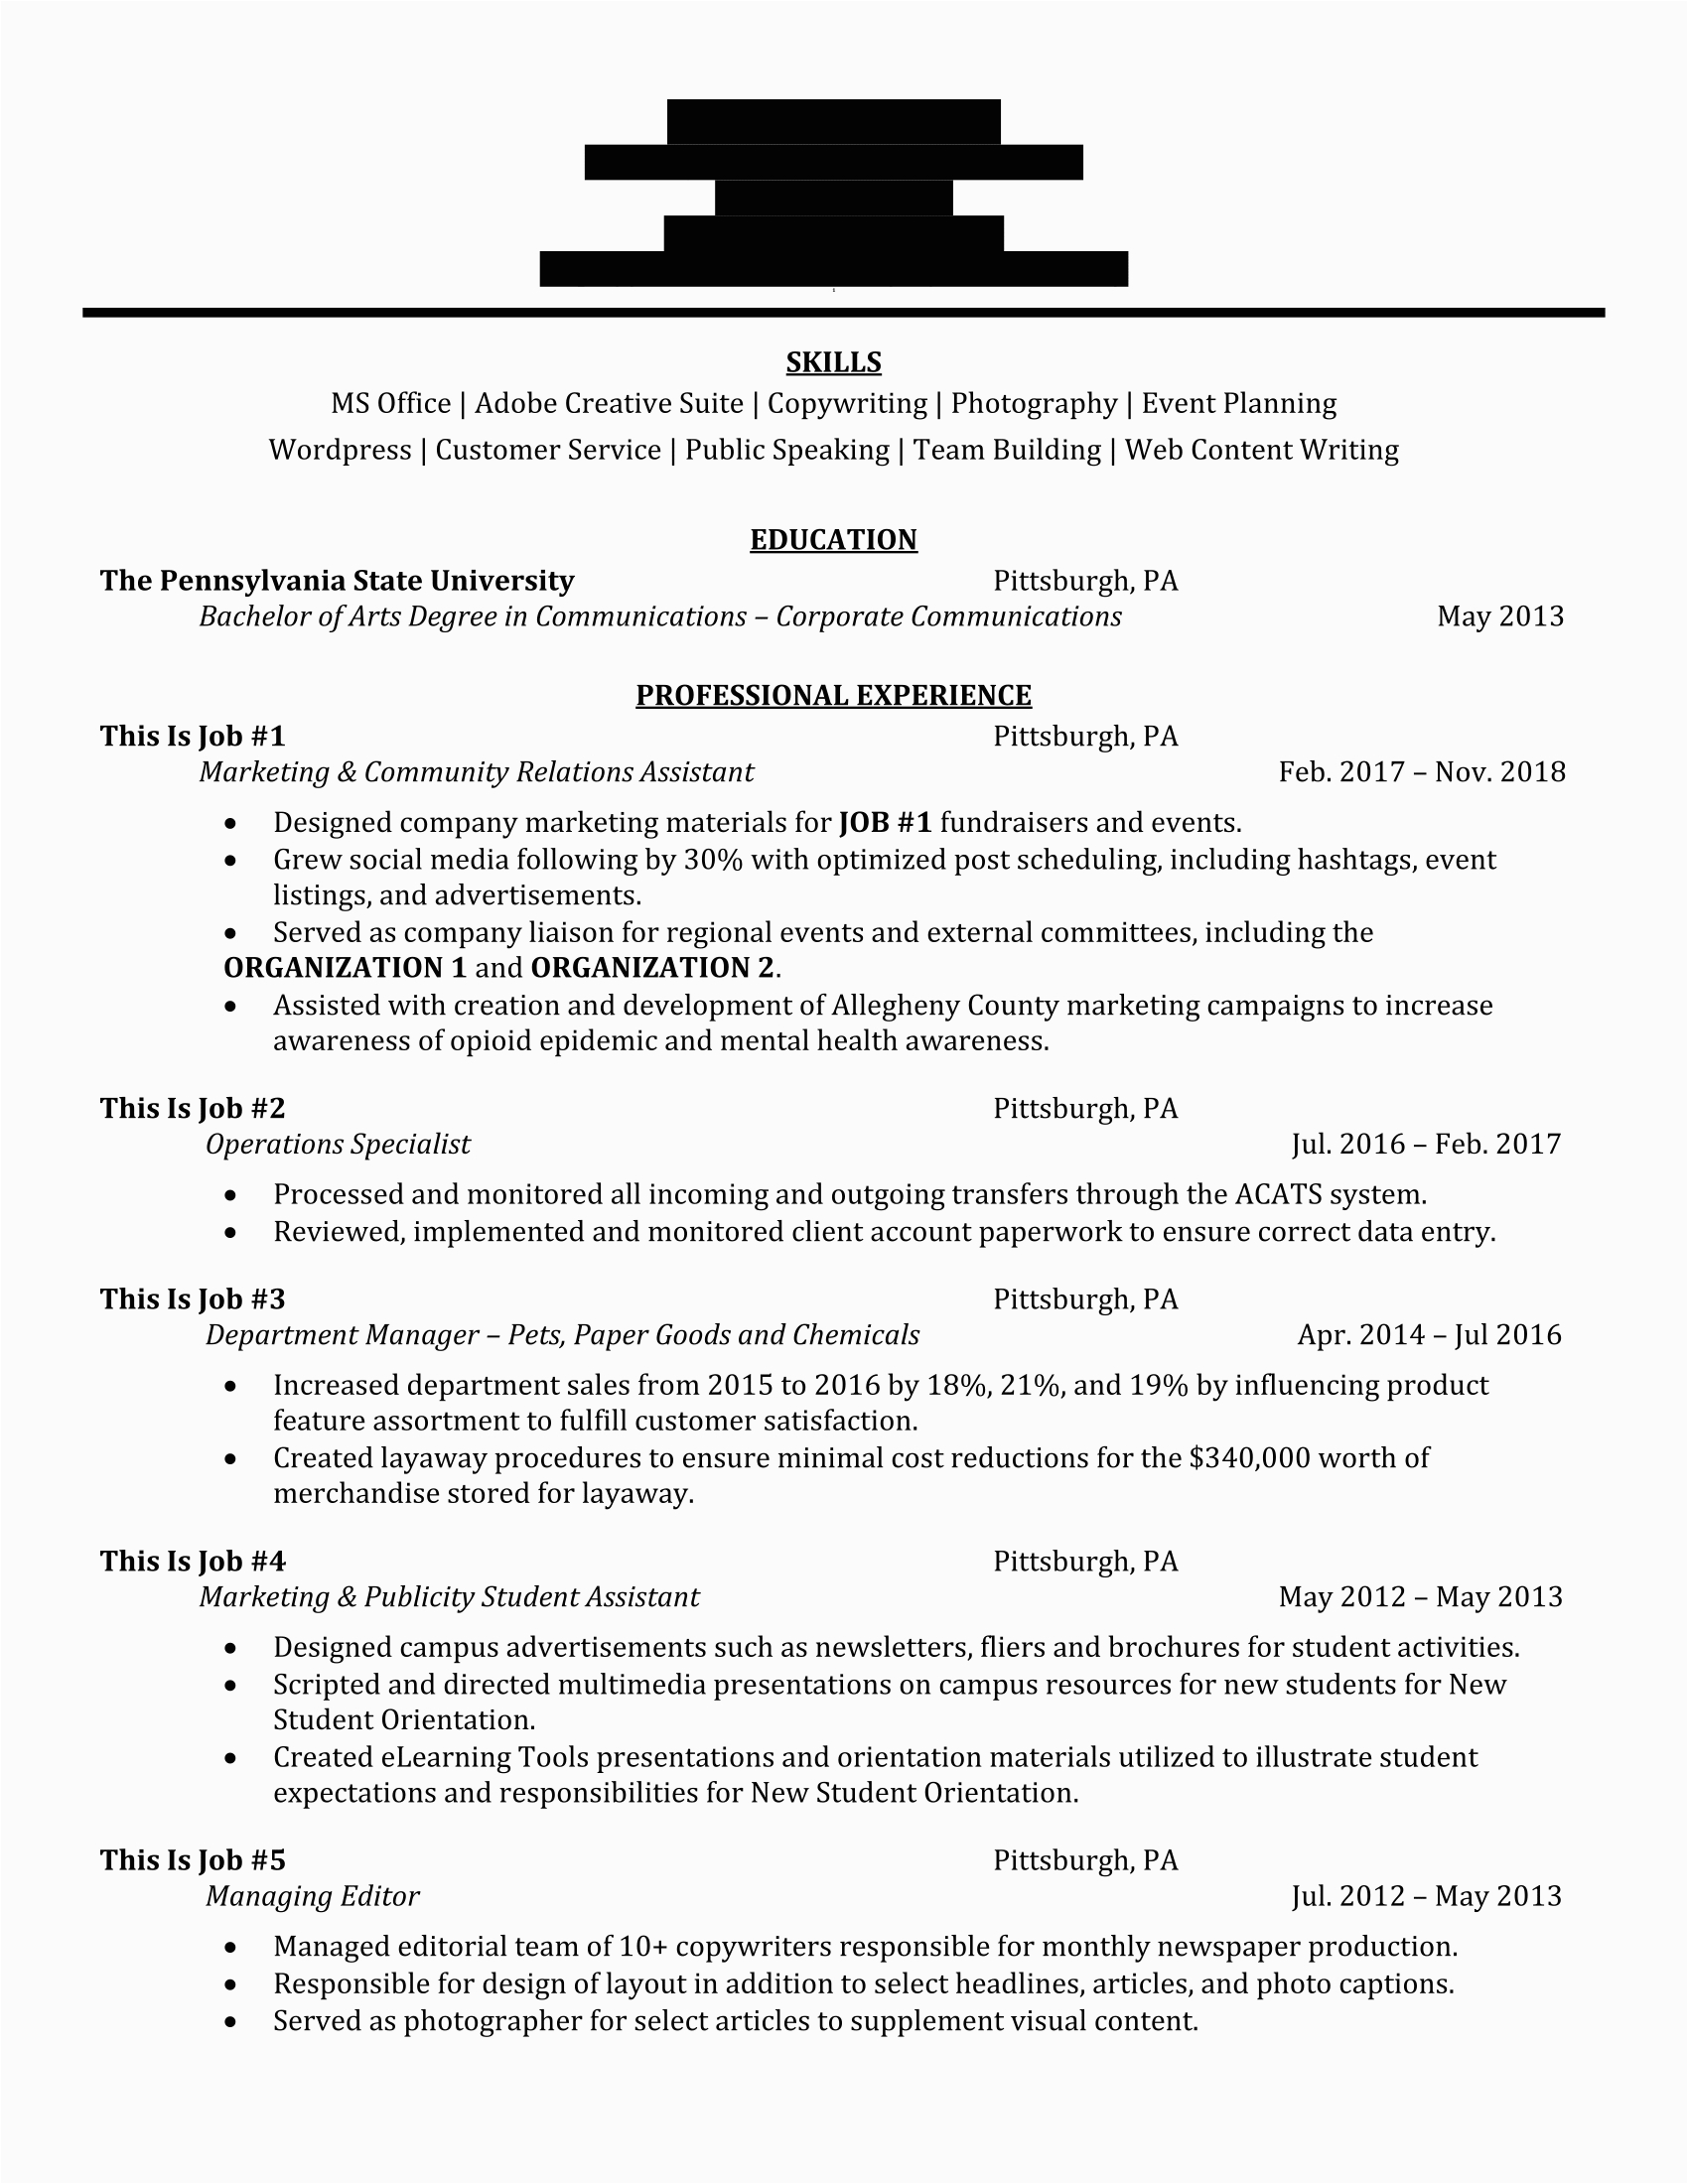 Resume Sample with A Few Years Of Experience Looking for some Advice On My Resume [28 Mid Level Munications